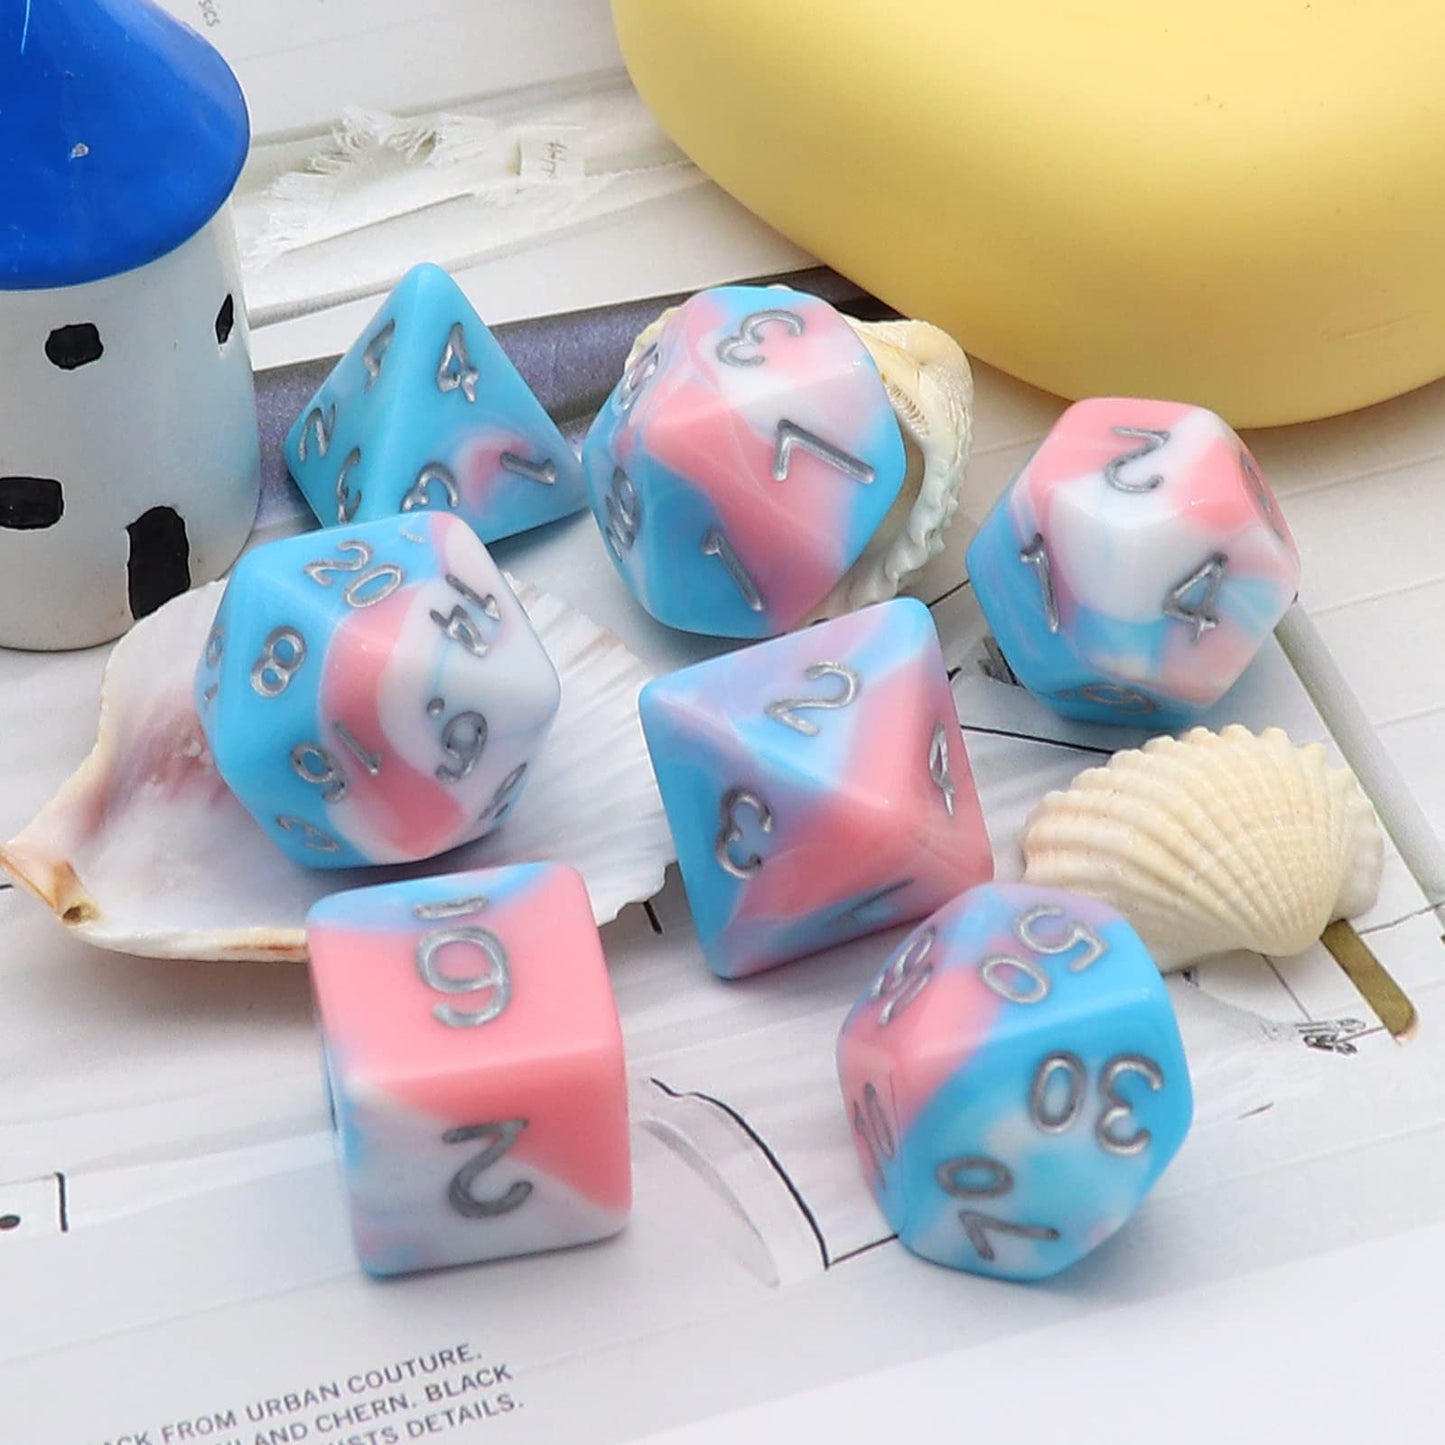 FREE Today: Dazed and Dreamy Dice Set